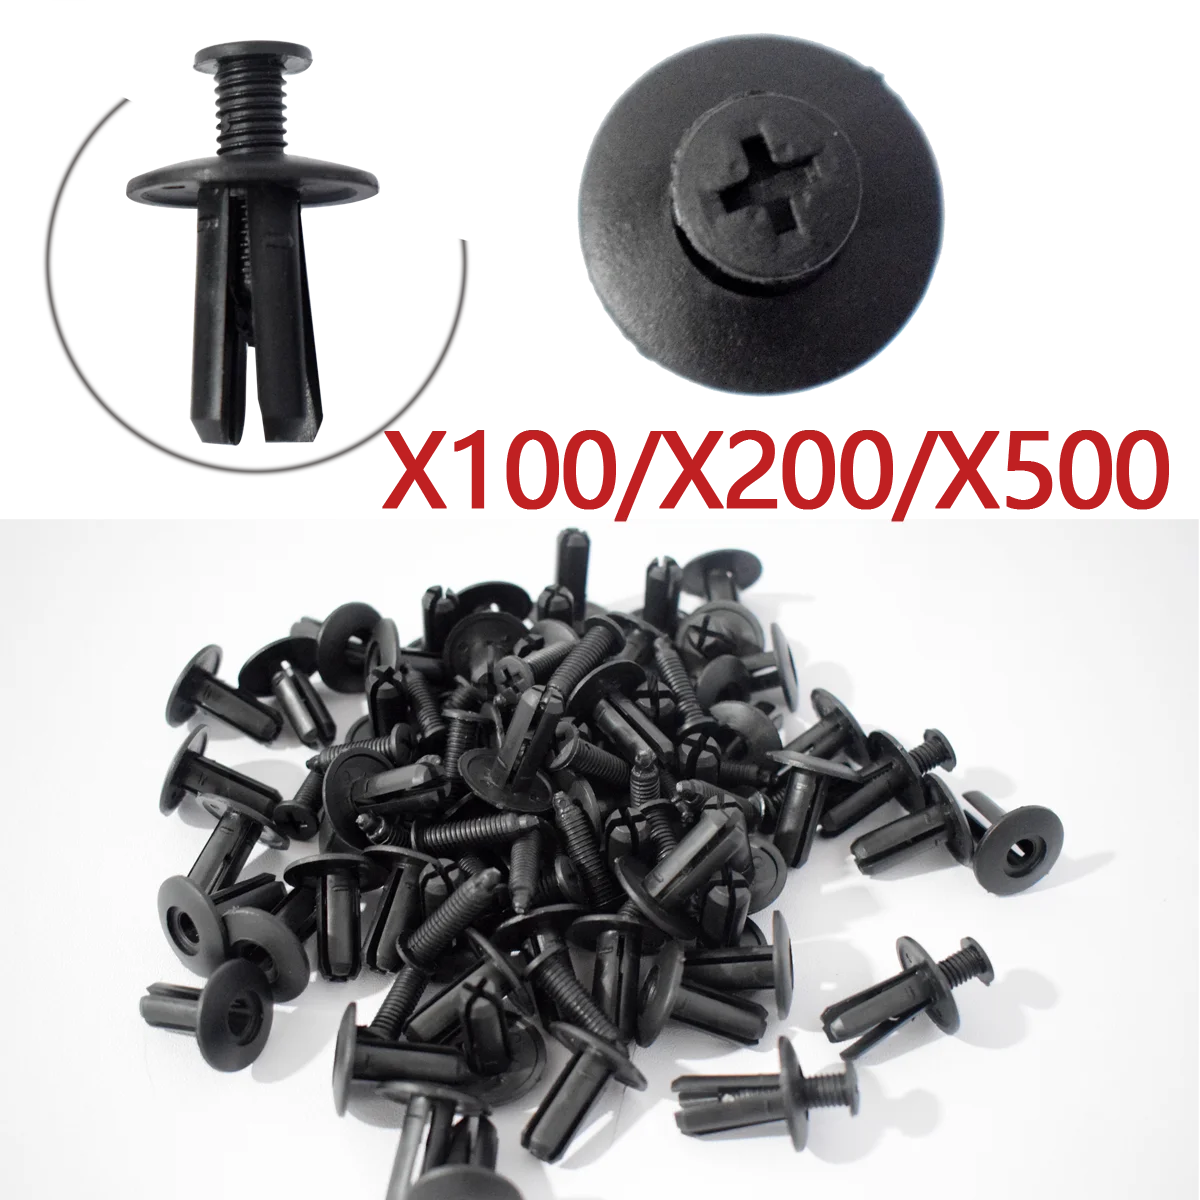 

ready storck 8mm Hole Retainer Clips- Plastic fastener Drive Rivets Mud Flaps Bumper Fender Push pin Clips for Auto Car Truck Do